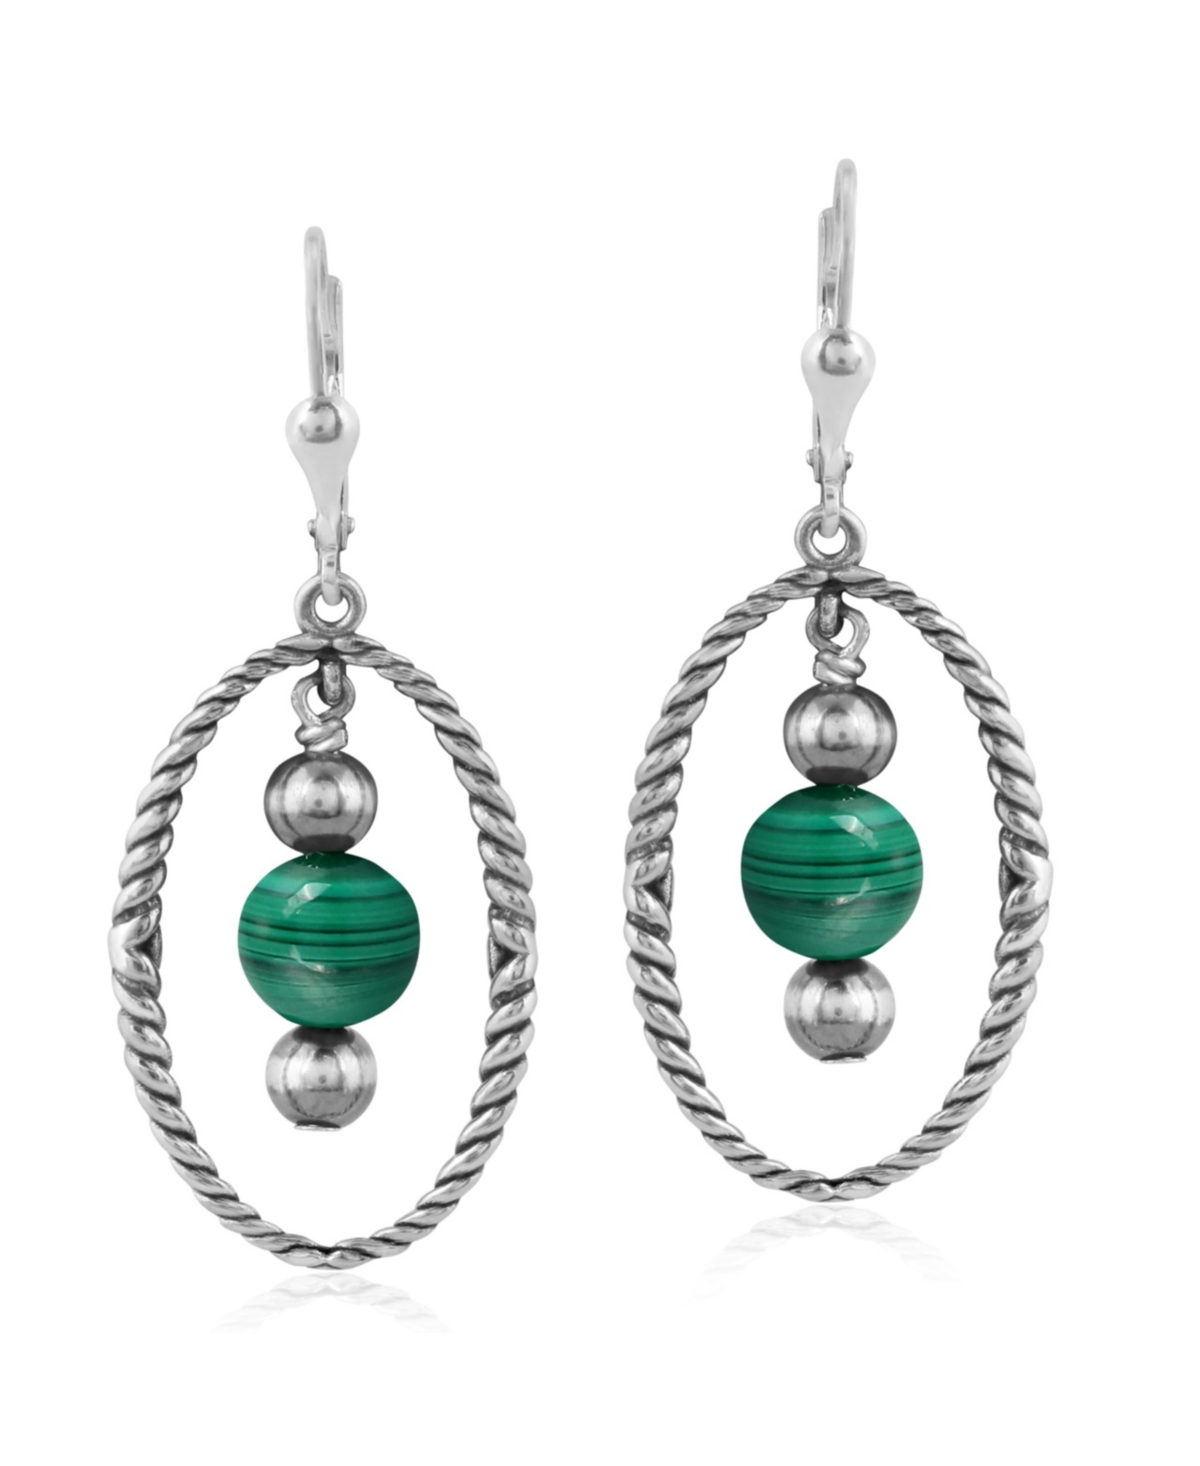 Sterling Silver Rope and Gemstone Bead Drop Earrings - Green malachite